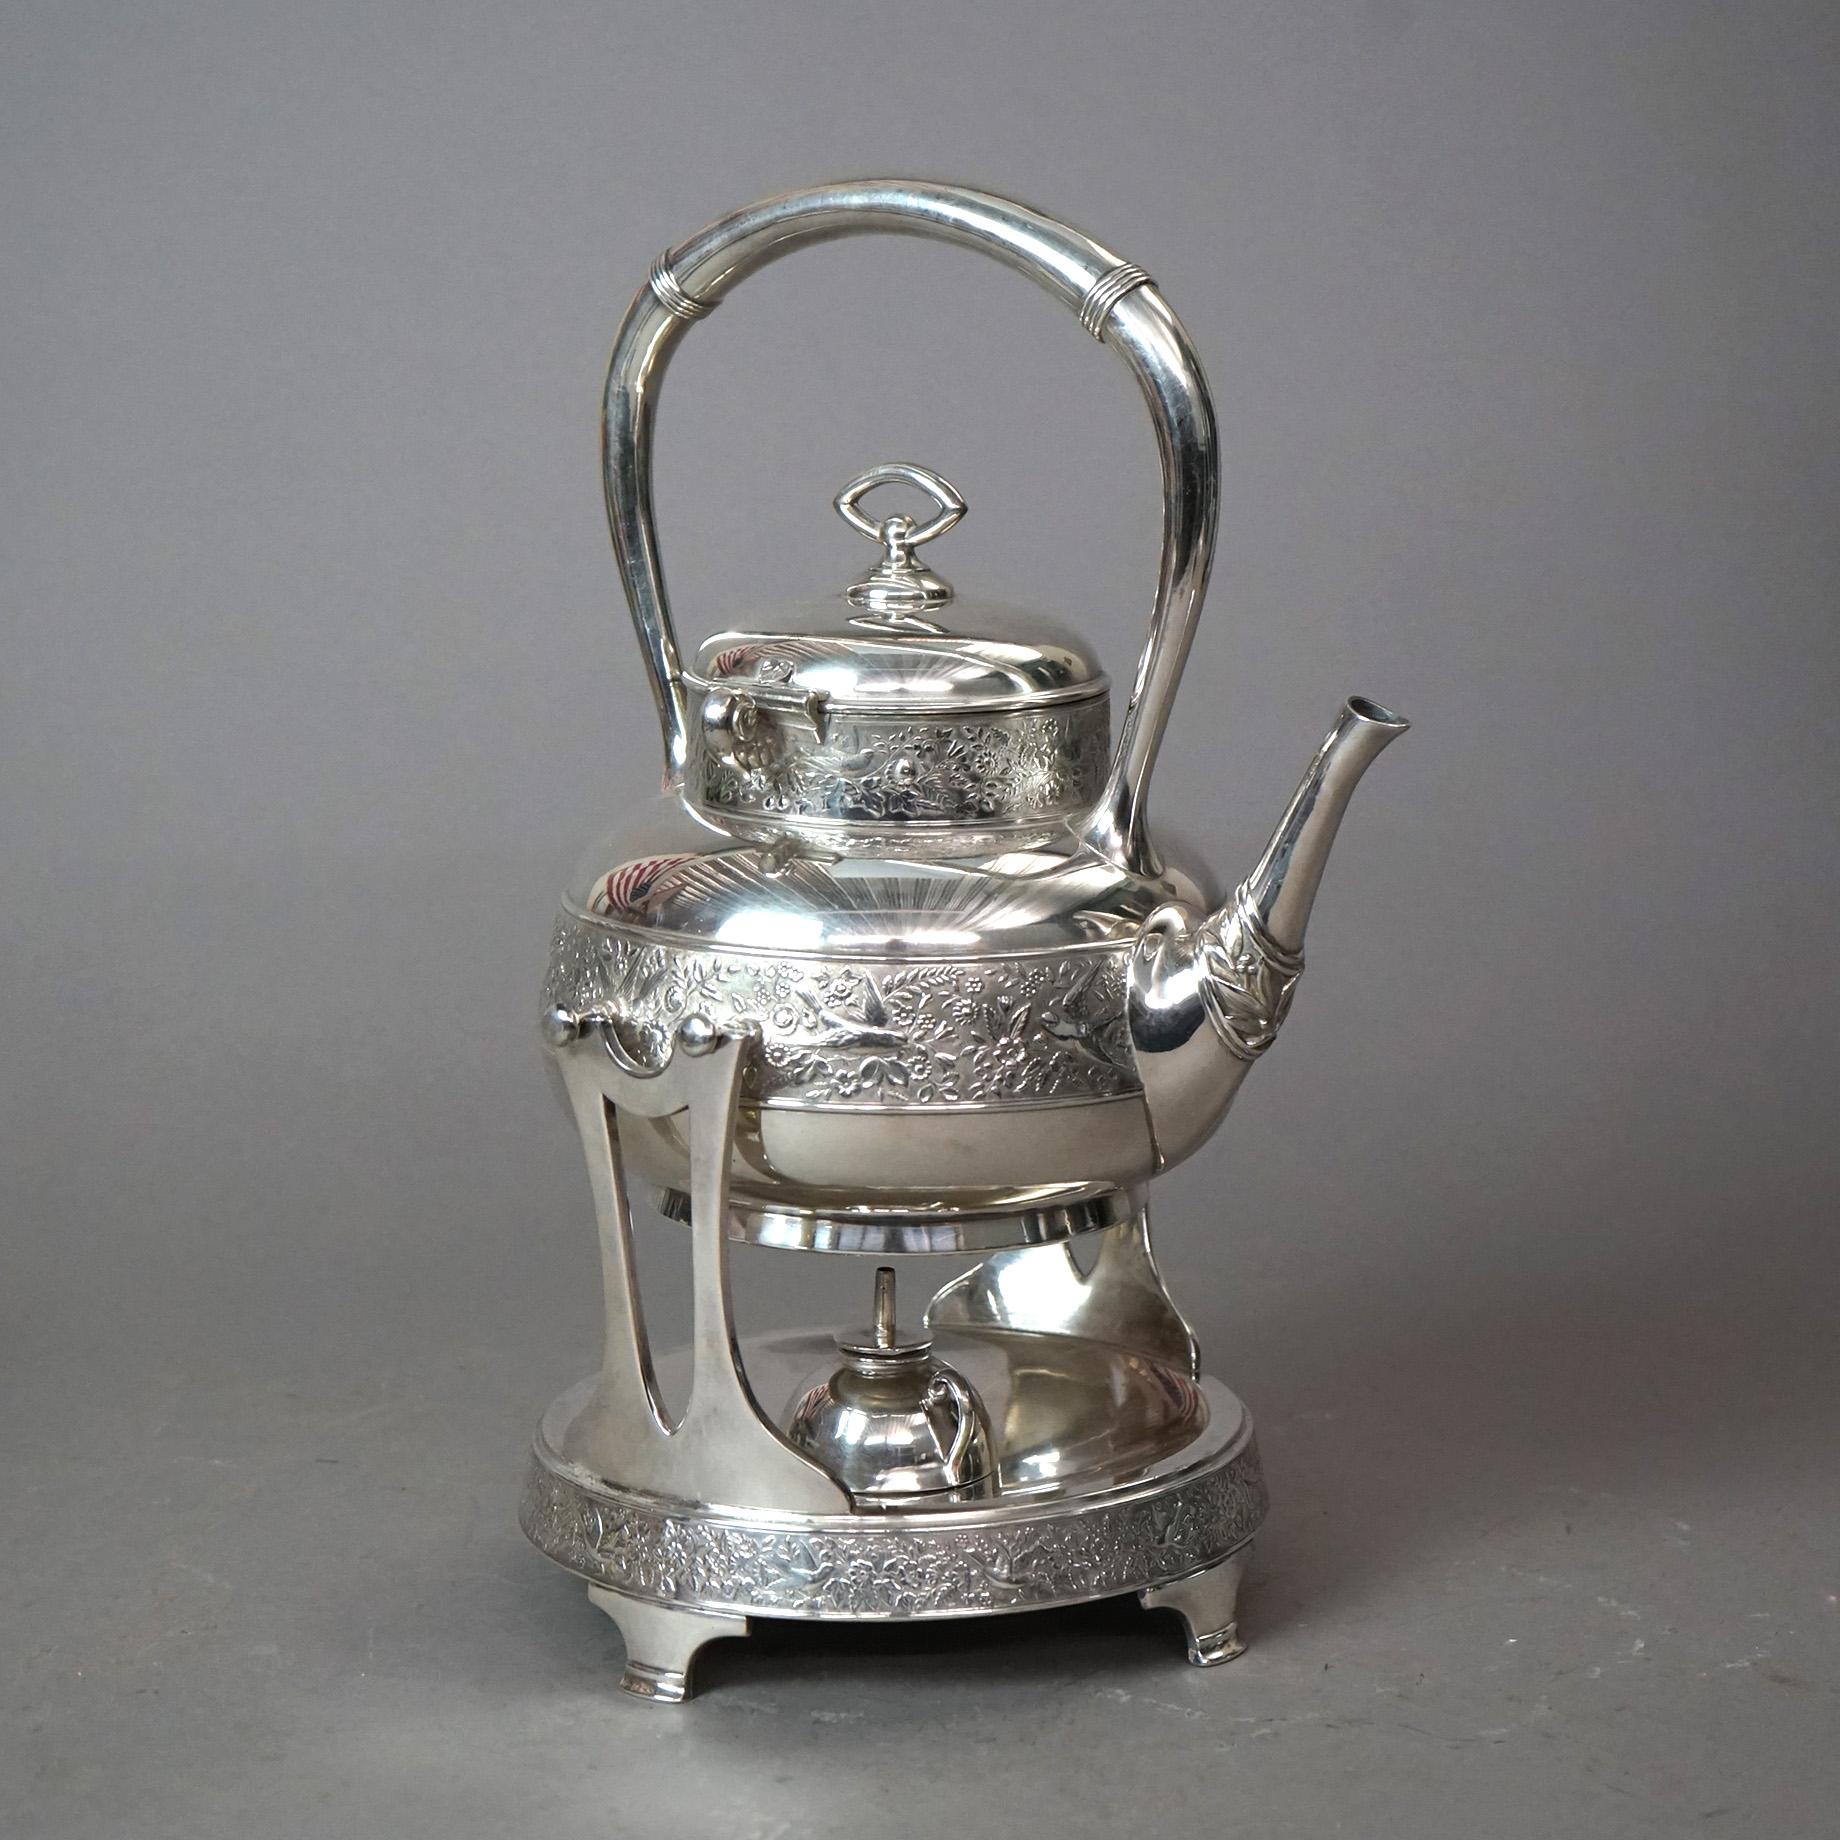 An antique Aesthetic teapot by Rogers offers silver plate construction with tilting teapot having embossed bird and foliate design, seated on heating stand, c1870

Measures - 14.5